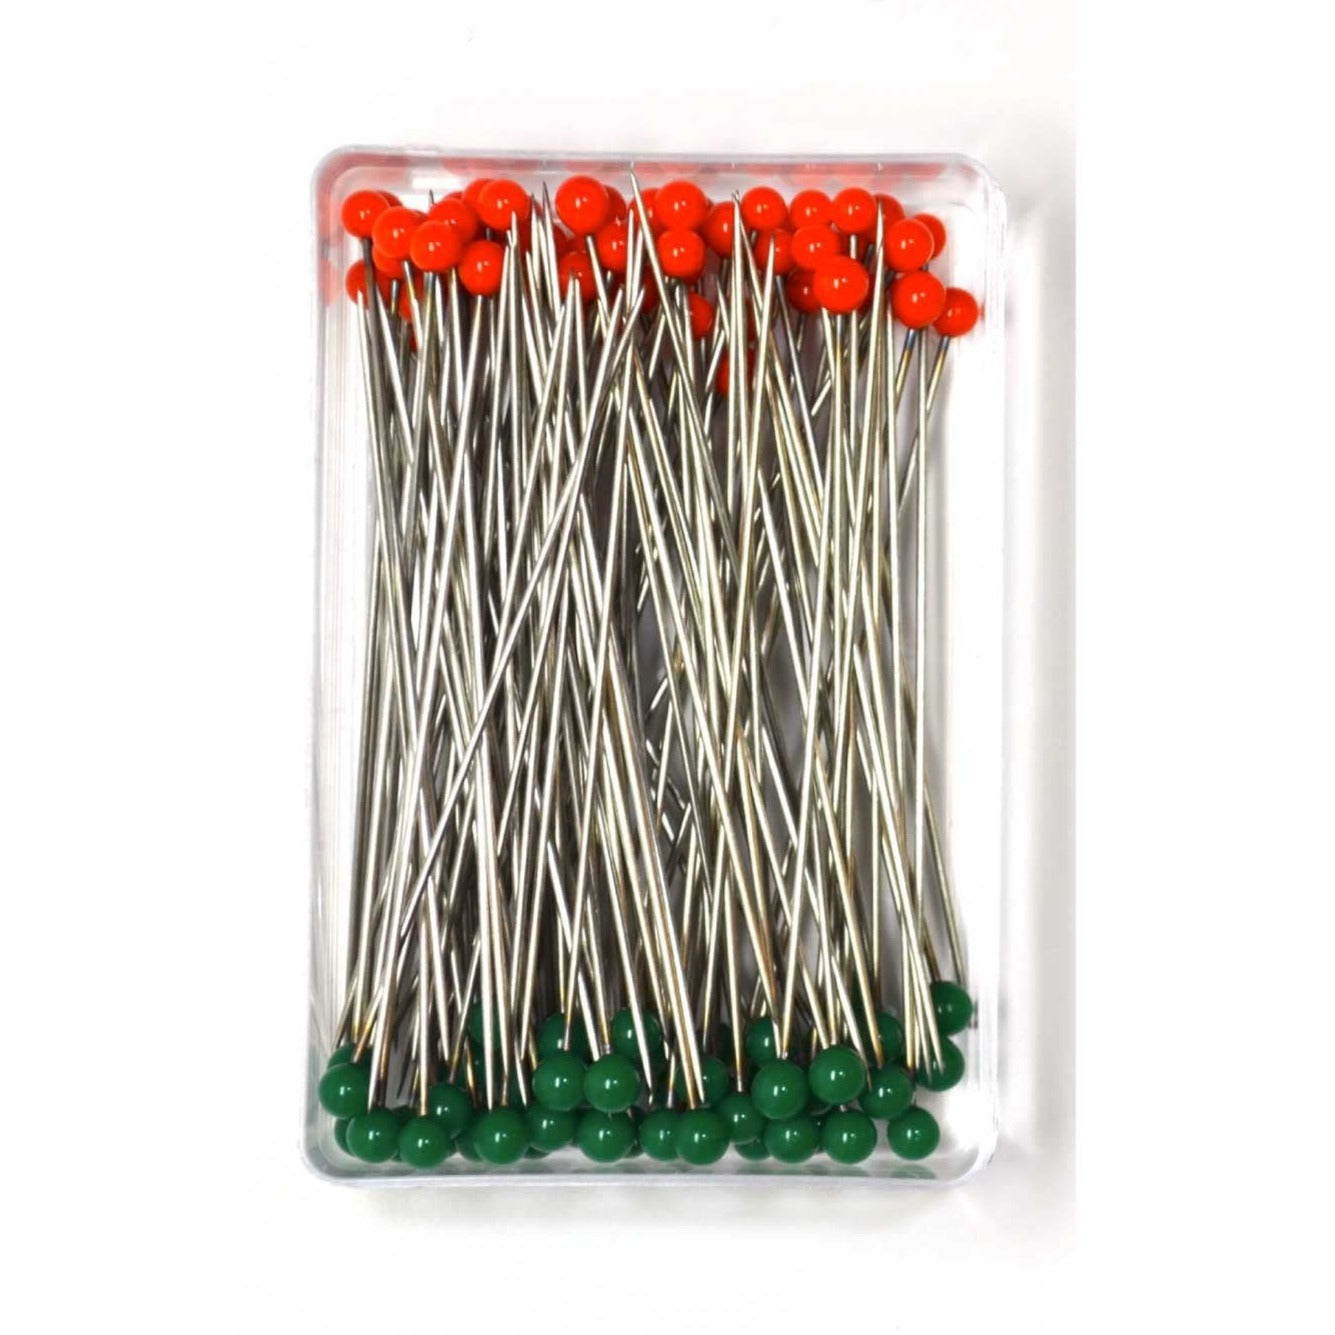 250 Extra Long Quilting Pins